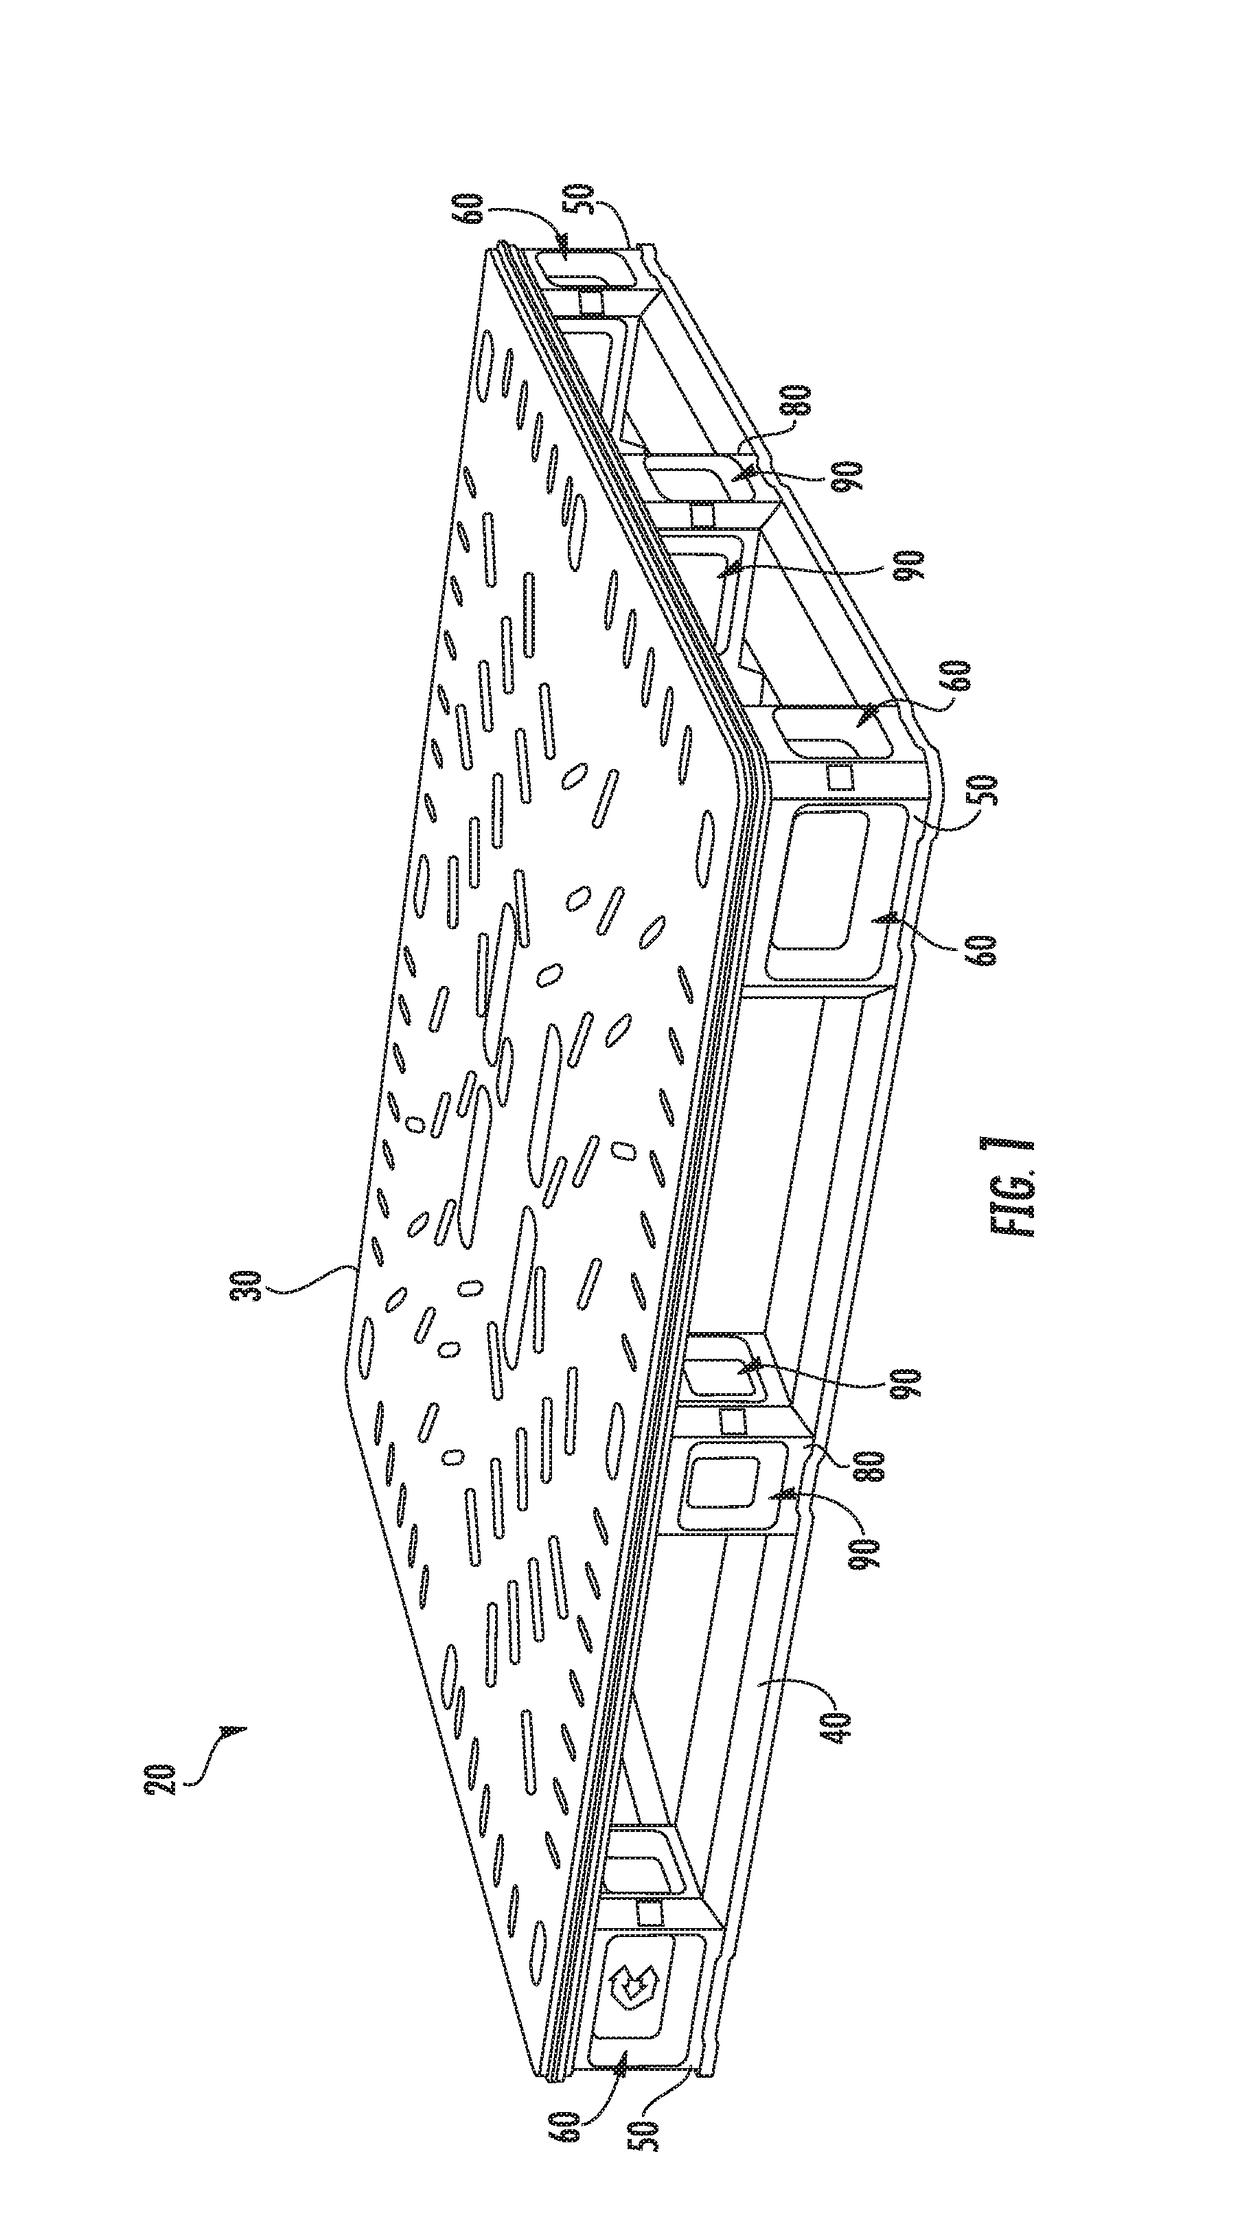 Plastic pallet with centerline markings and associated methods